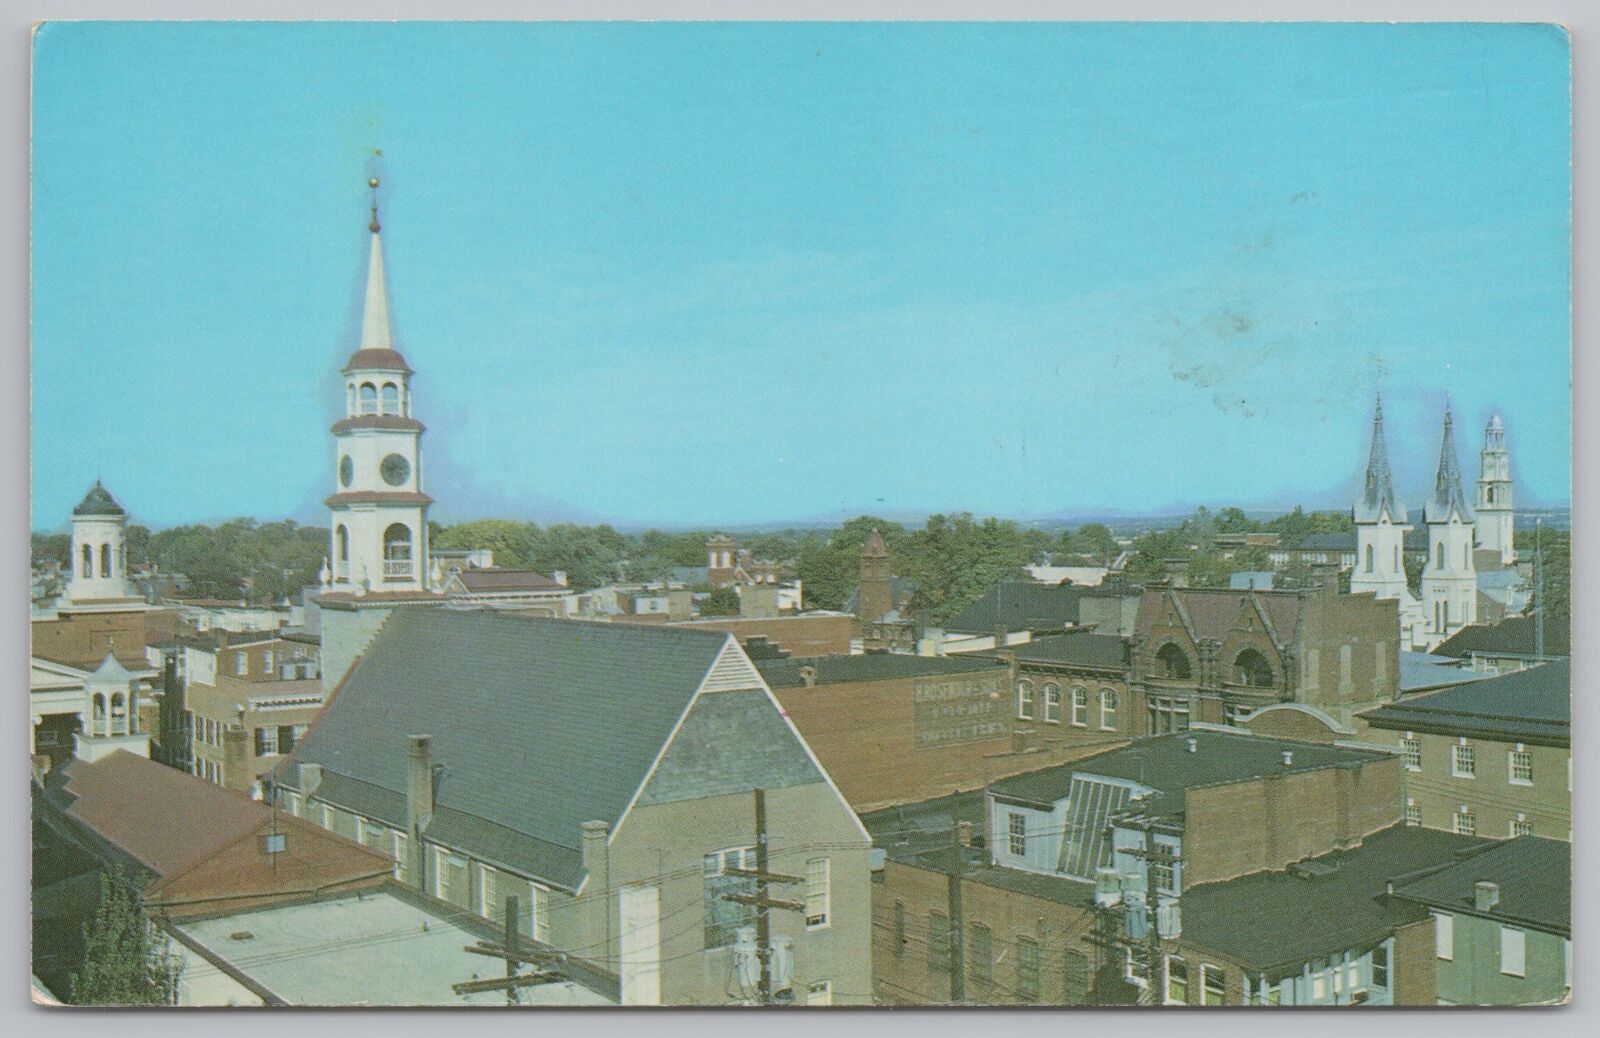 Church~Frederick Maryland~The Clustered Spires Of Frederick Churches~Vintage PC